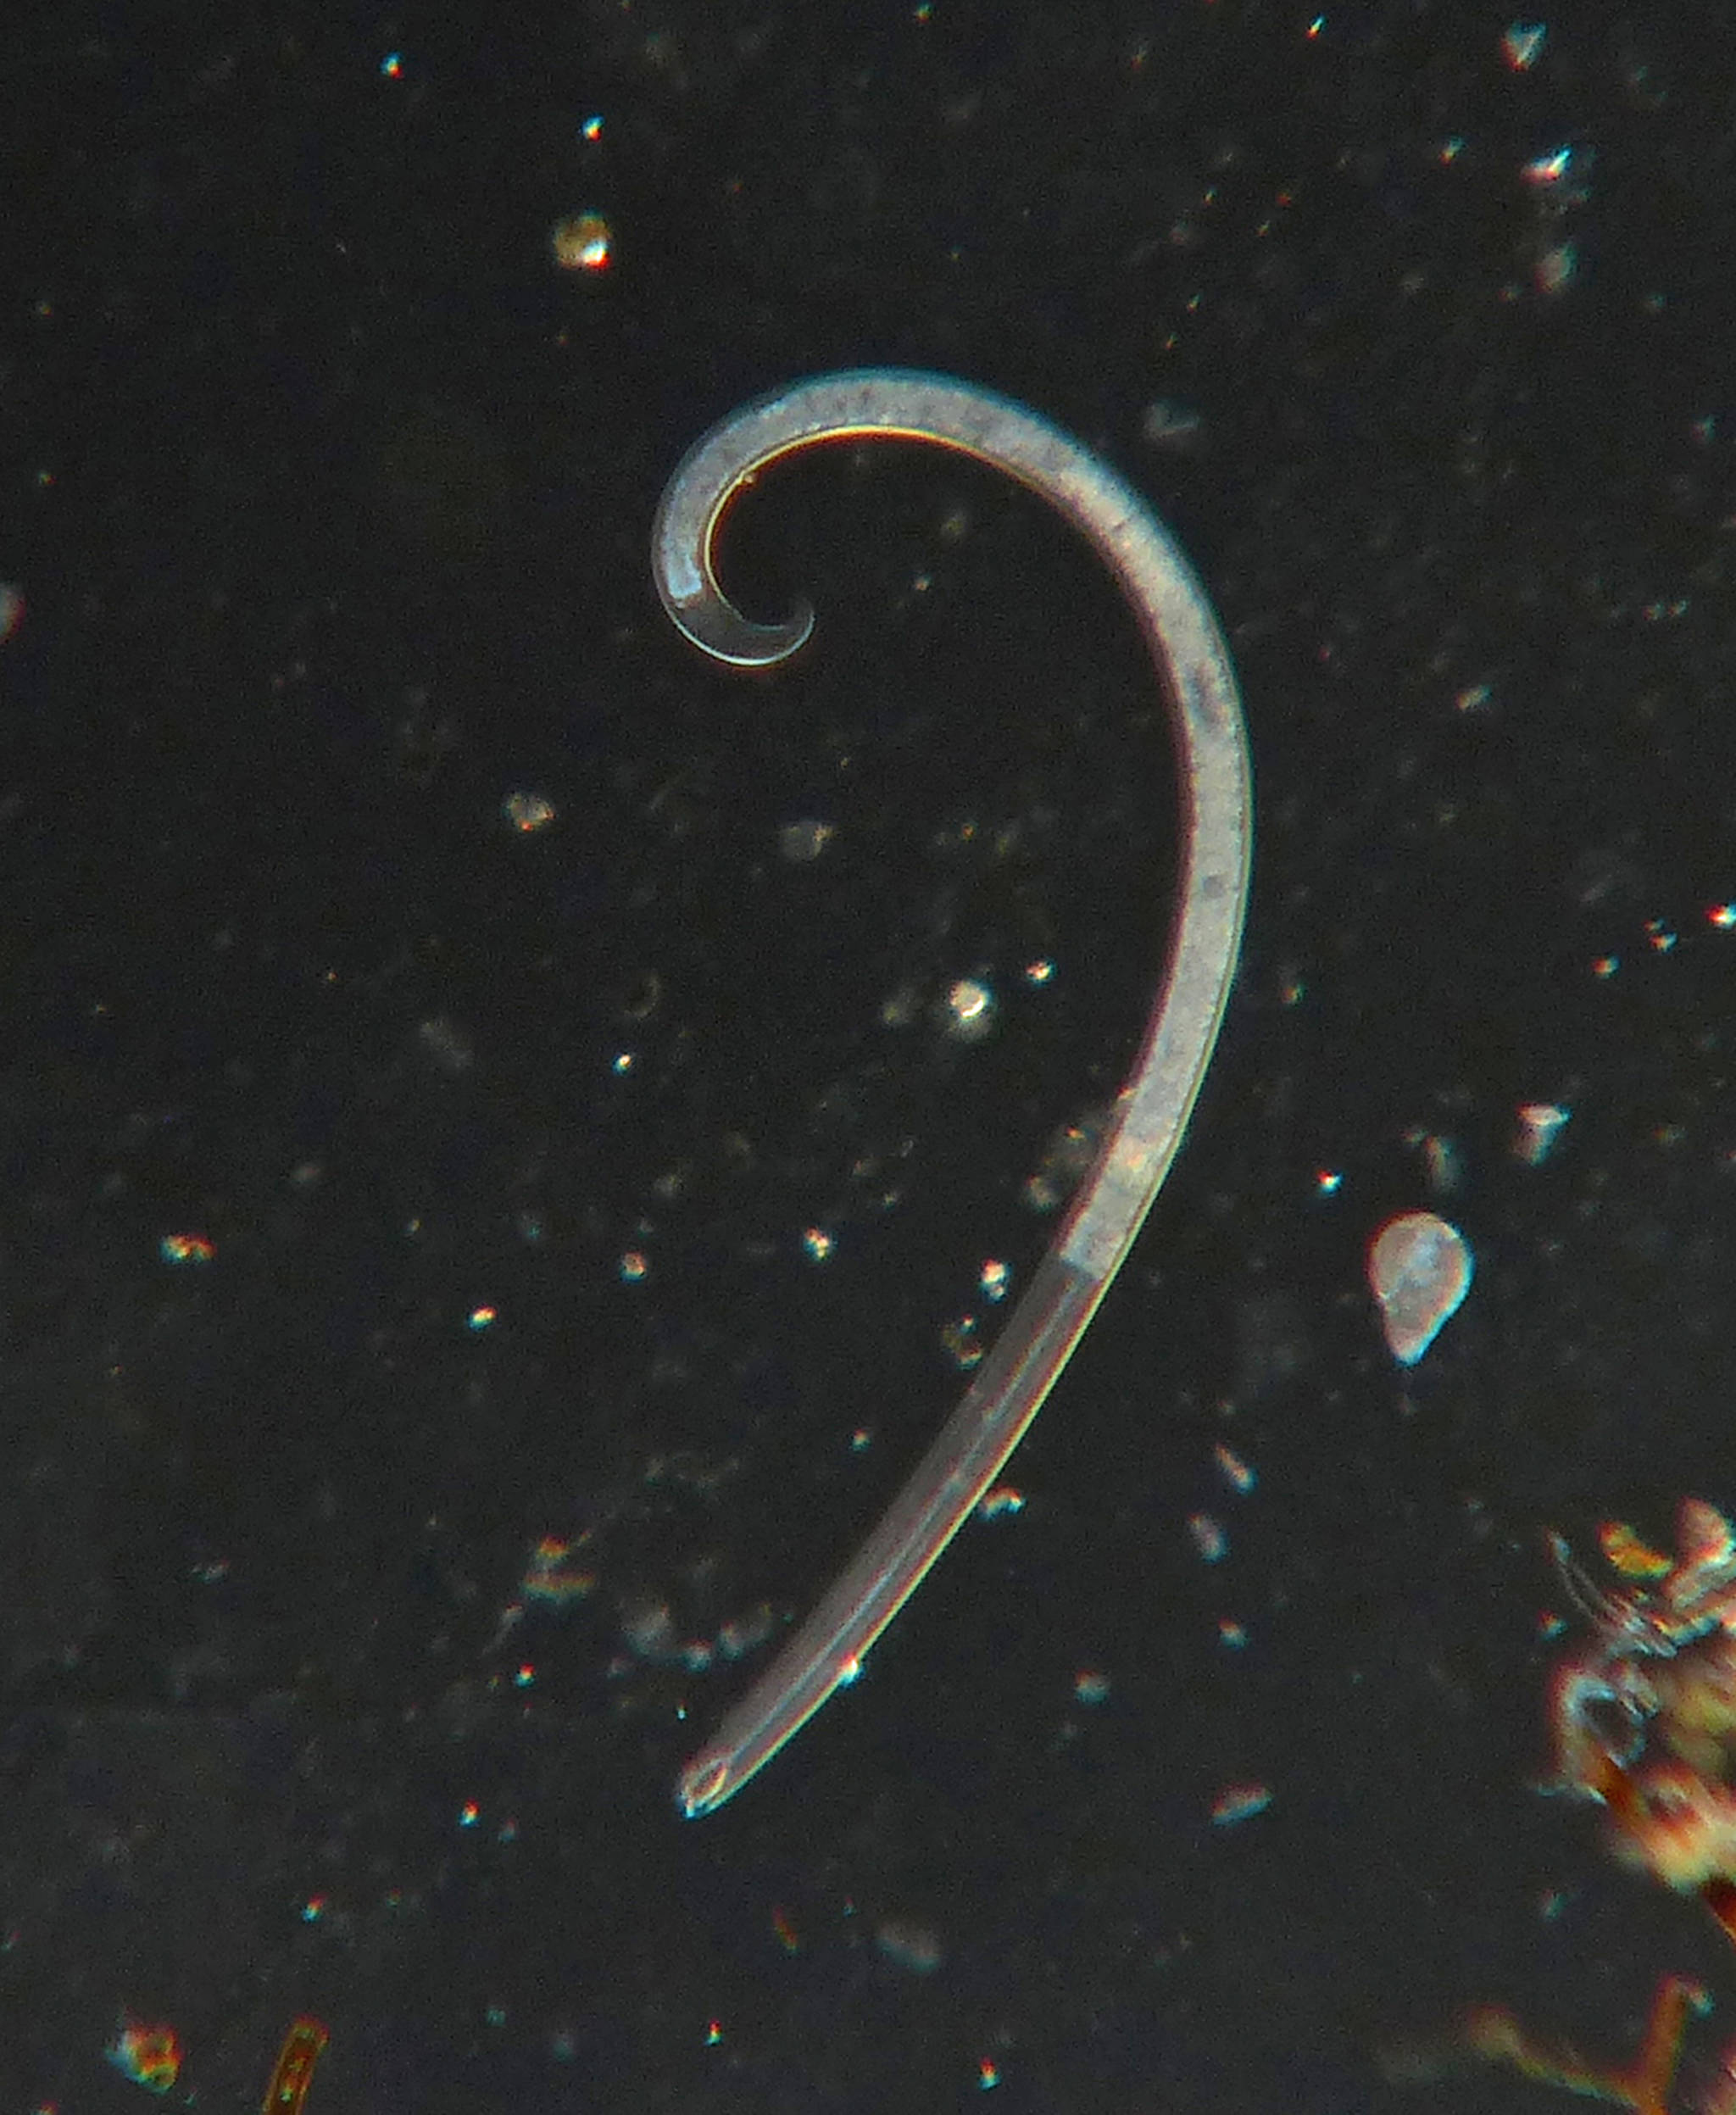 A typical nematode or round worm, as seen under a microscope. (Courtesy photo | Bob Armstrong)